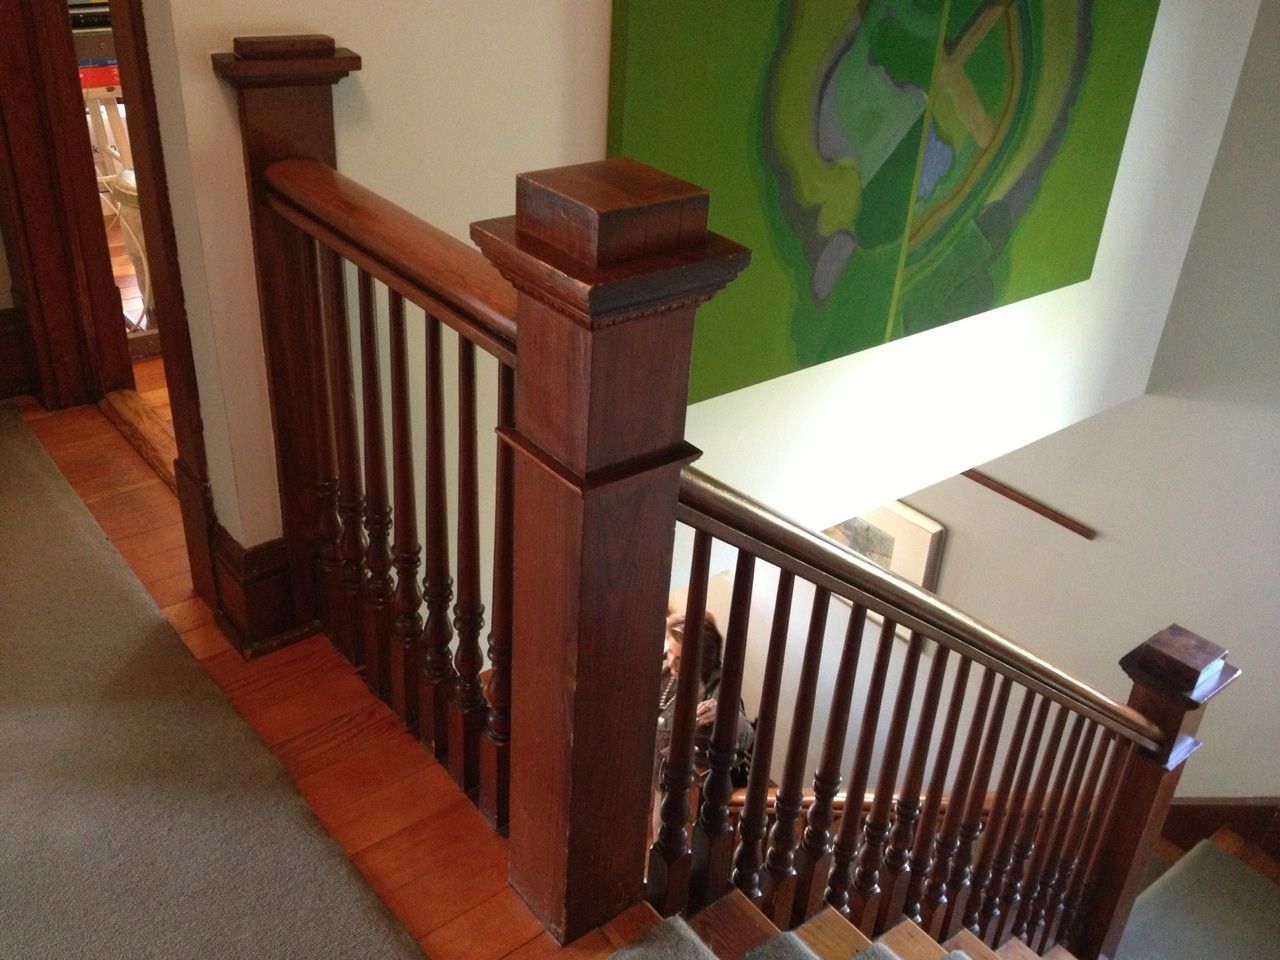 The newel posts inside are even prettier!